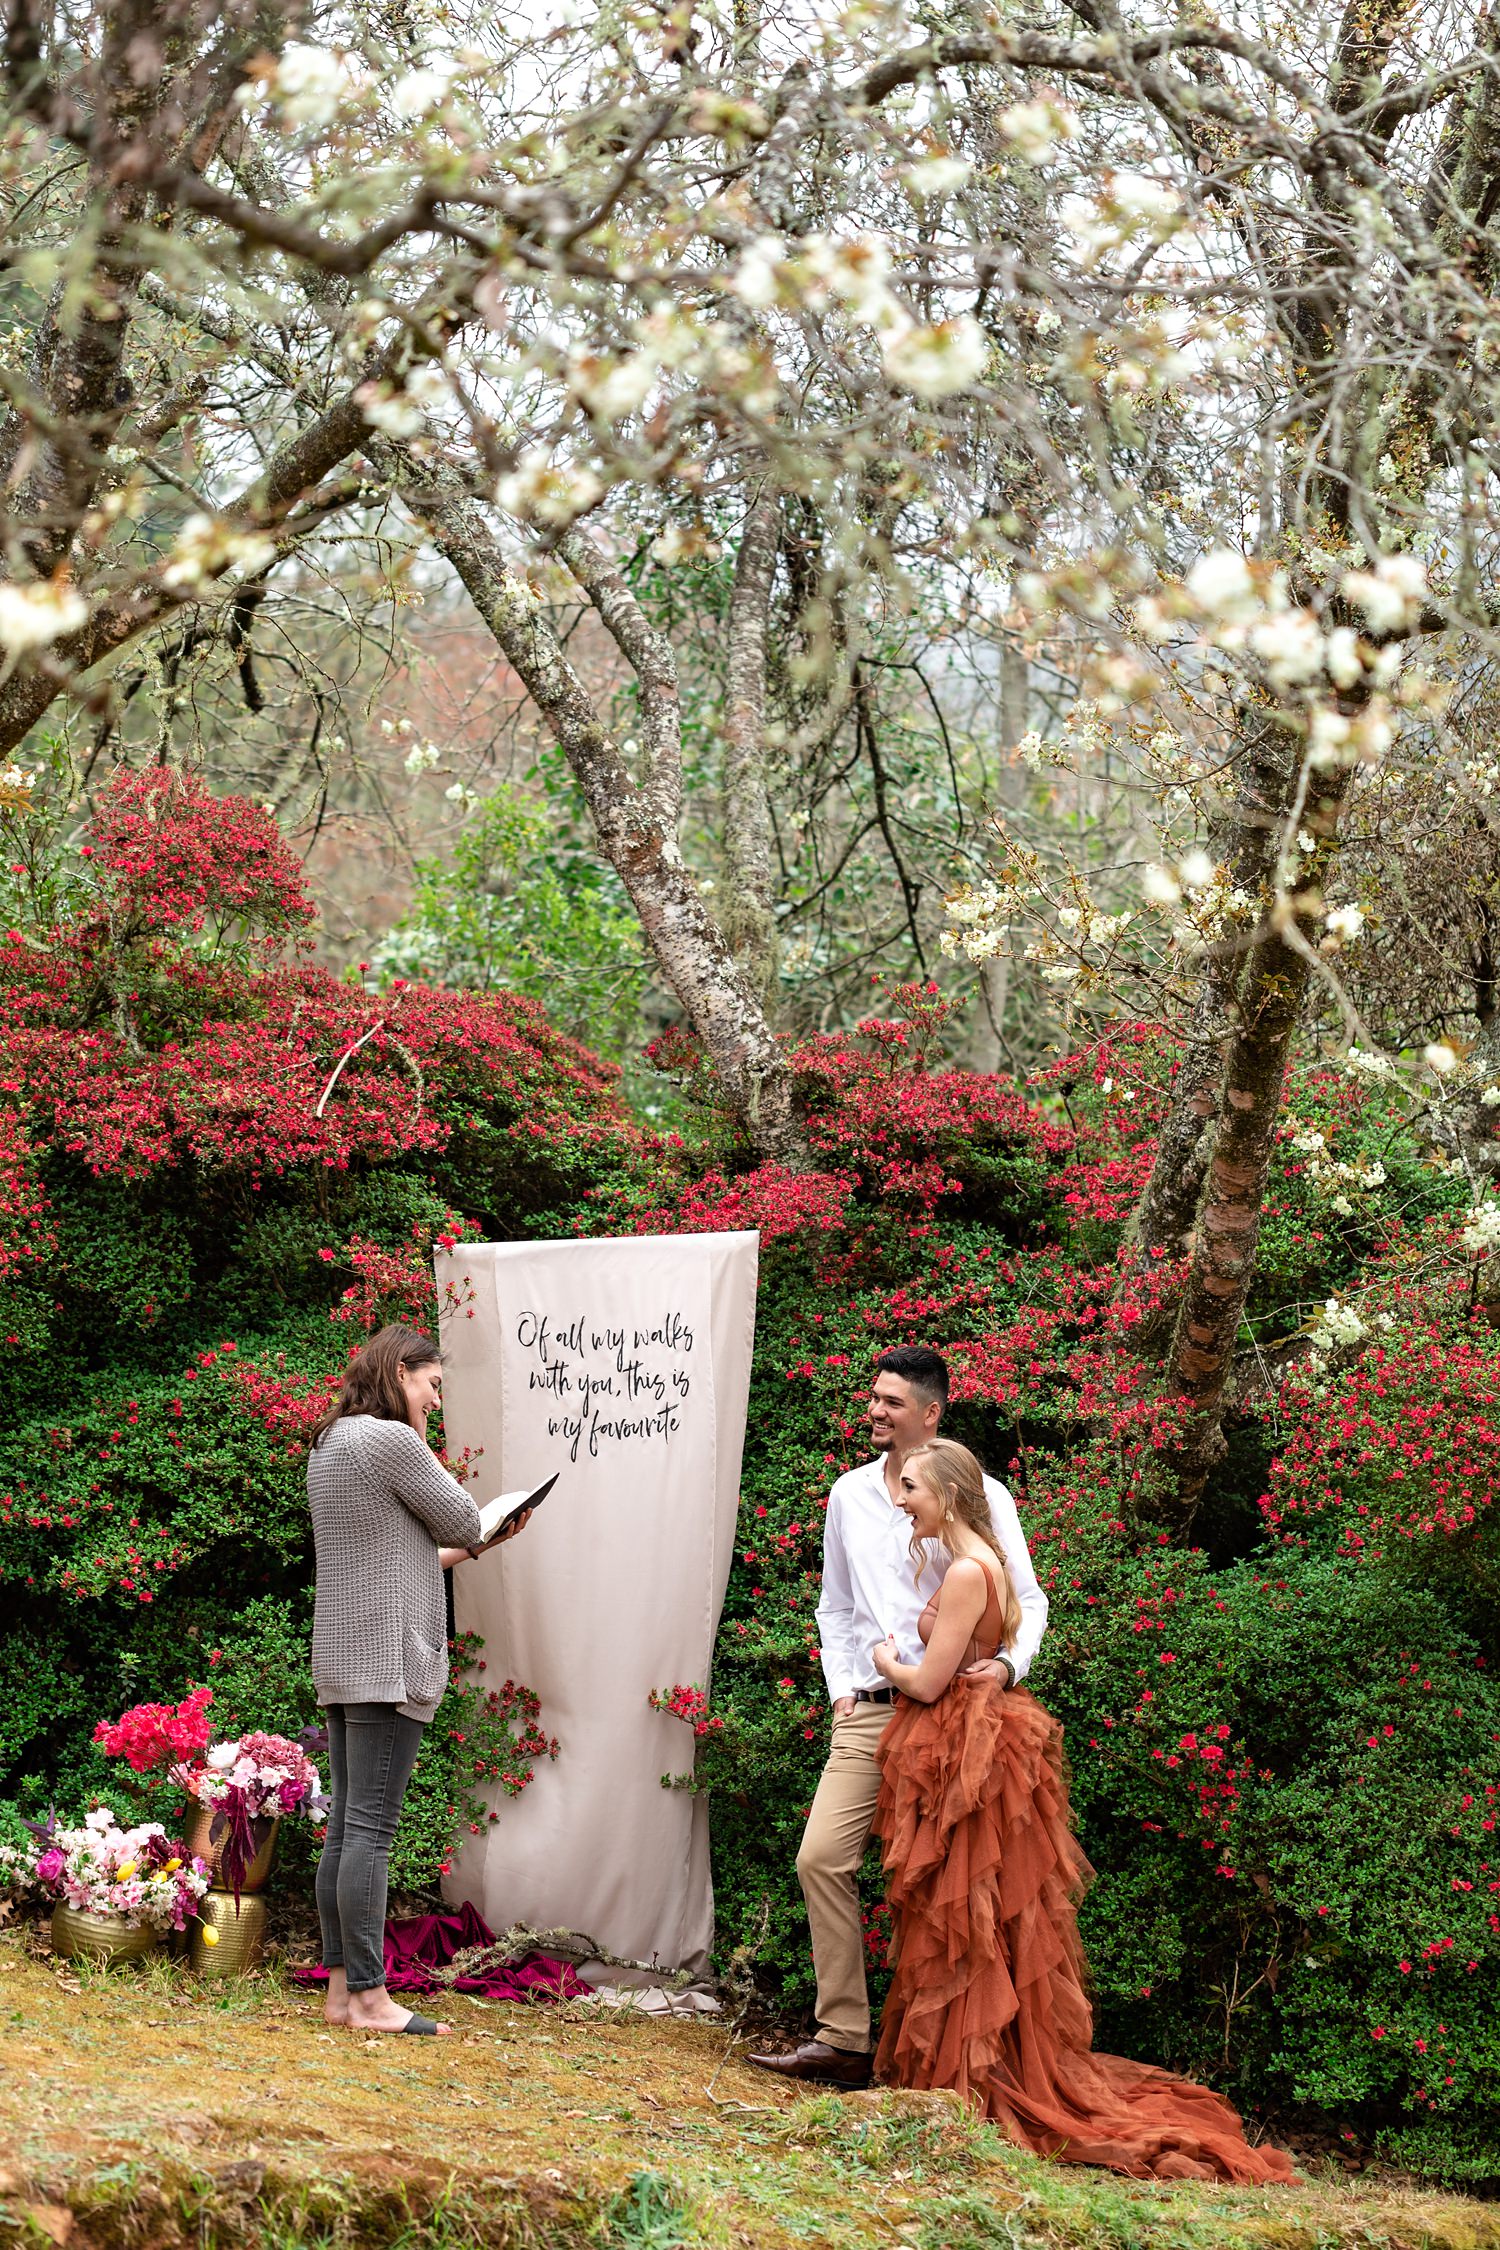 Bride, in a burnt orange wedding dress by Silver Swallow, and Groom kiss at the end of the ceremony in fornt of a DIY banner and azalea flowers at their elopement in Magoebaskloof, South Africa.